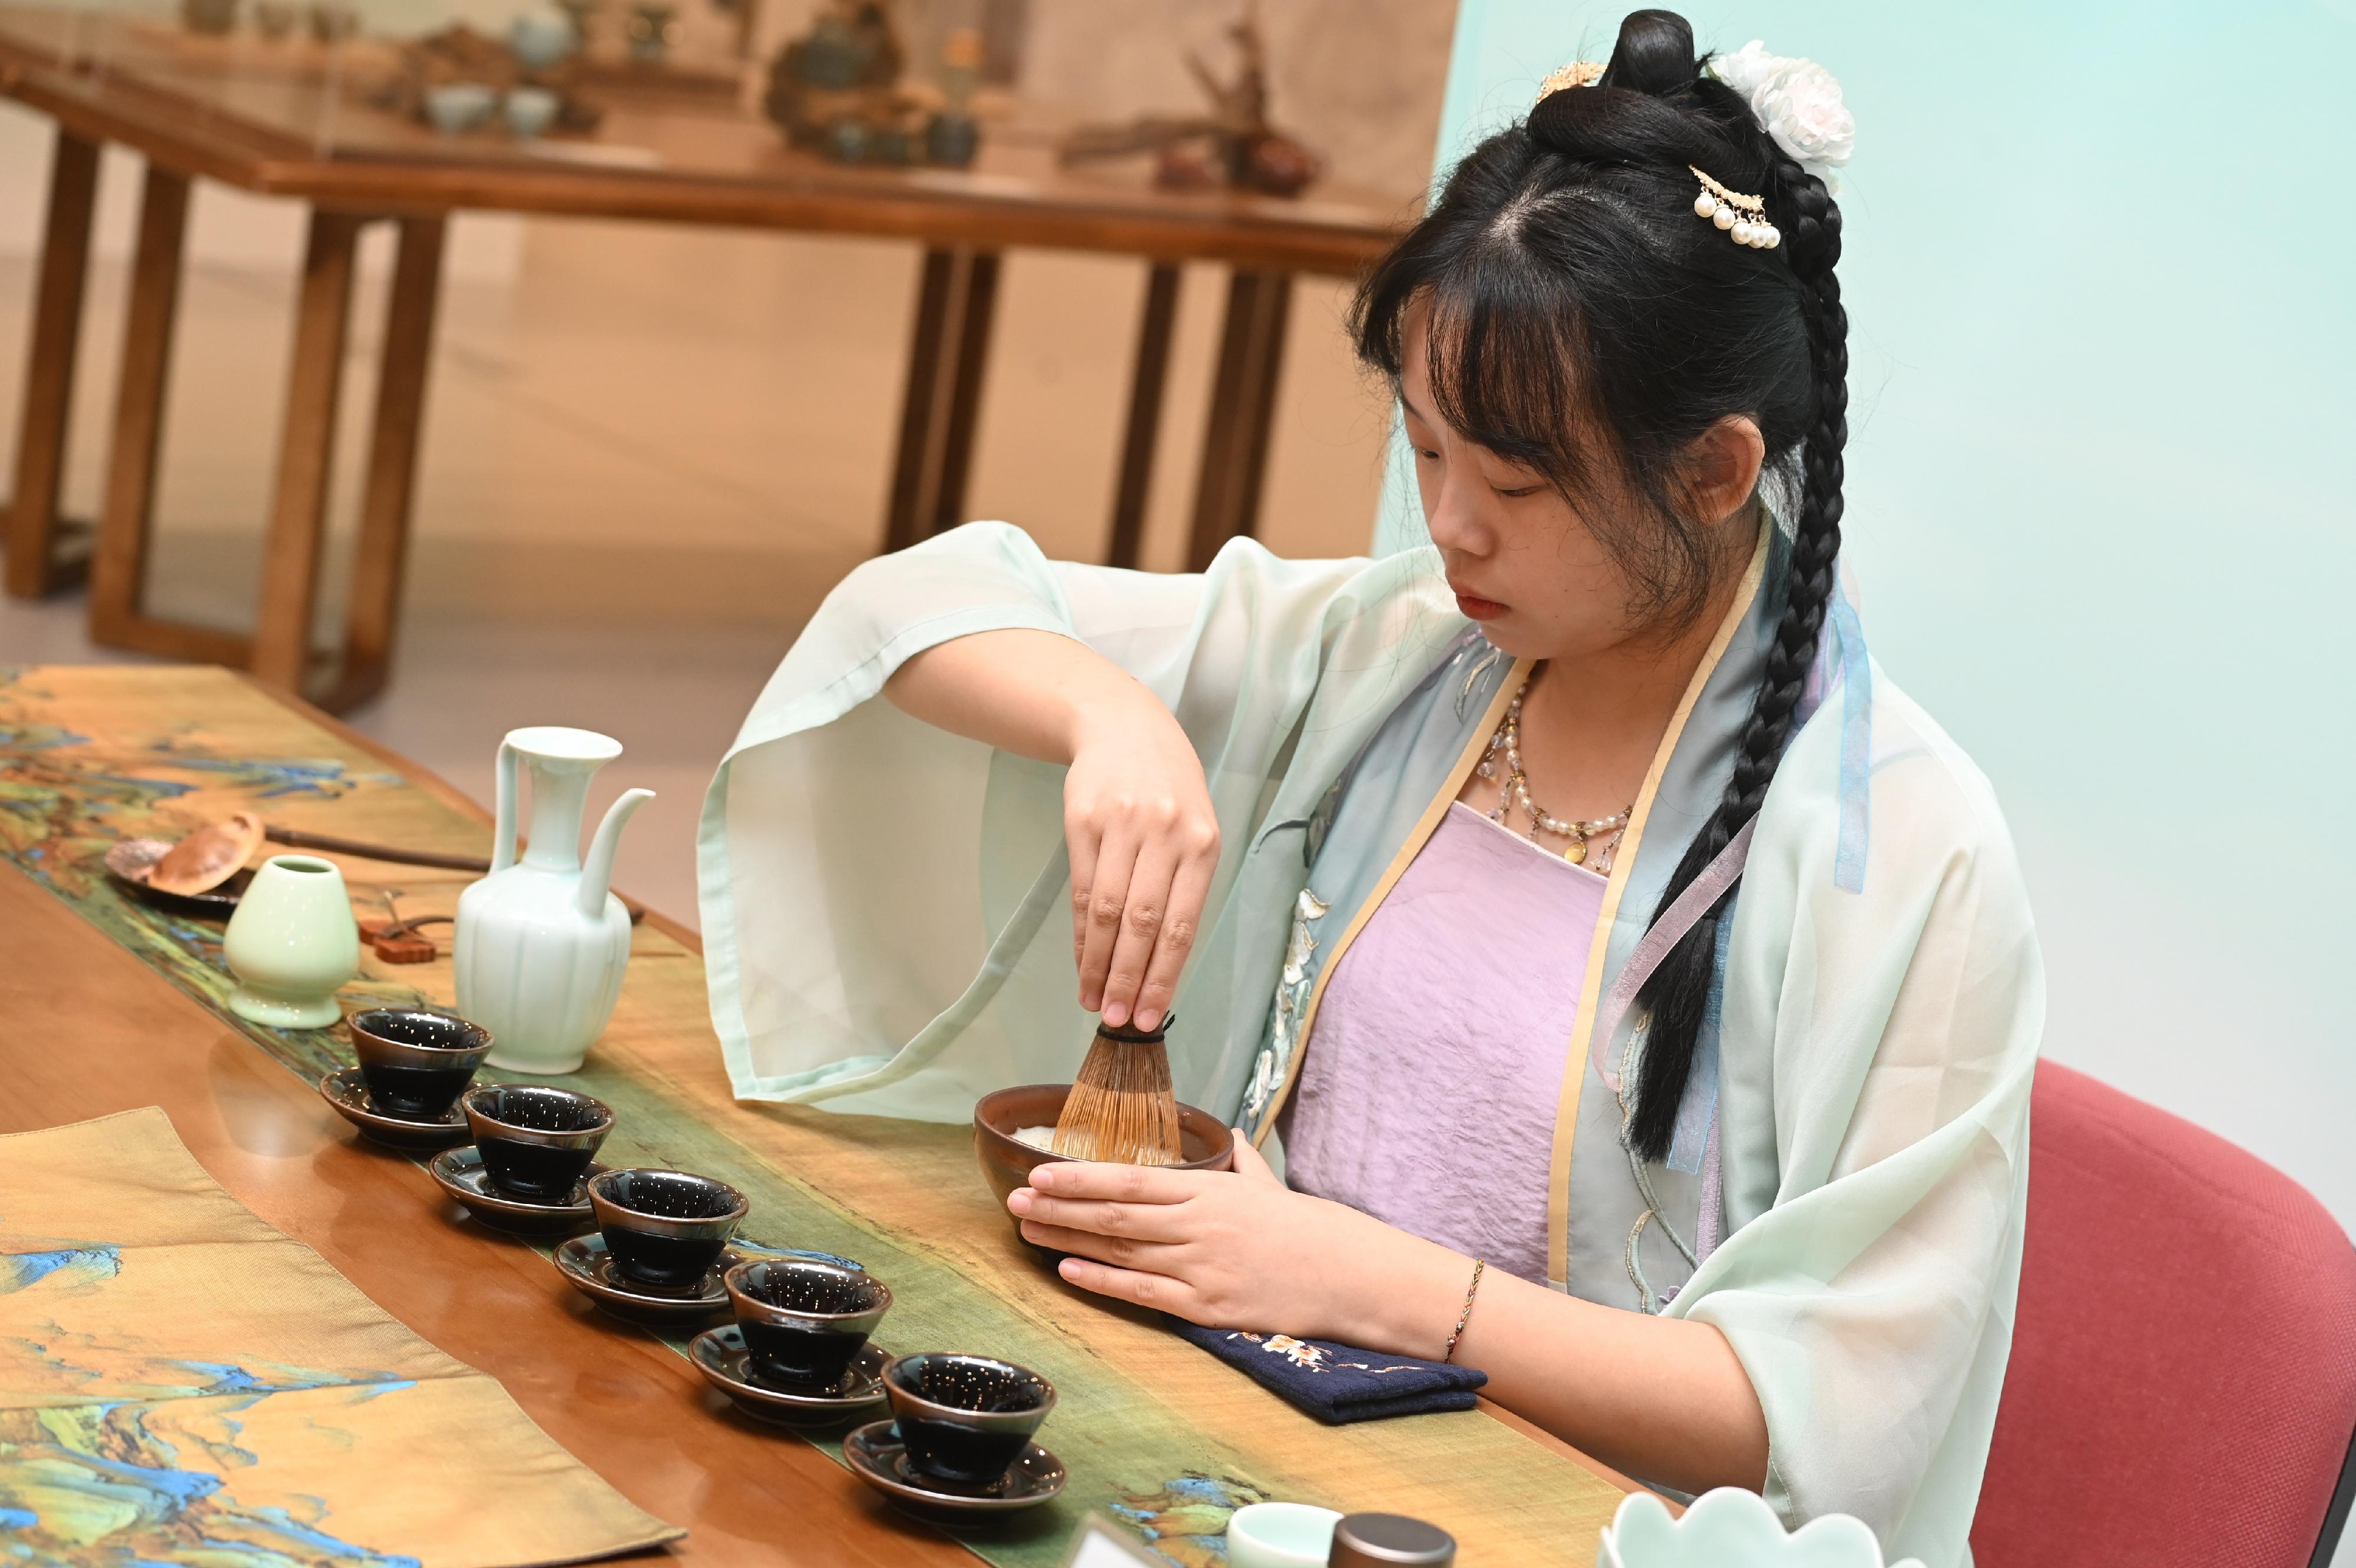 The opening ceremony for the "Genesis and Spirit - Tea for Harmony · Yaji Cultural Salon: Exhibition of the Tea Culture of Zhejiang" was held today (August 4) at the Hong Kong Central Library. Photo shows the demonstration of Zhejiang Provincial intangible cultural heritage item, Wuzhou juyan tea-tipping technique of the Song dynasty.